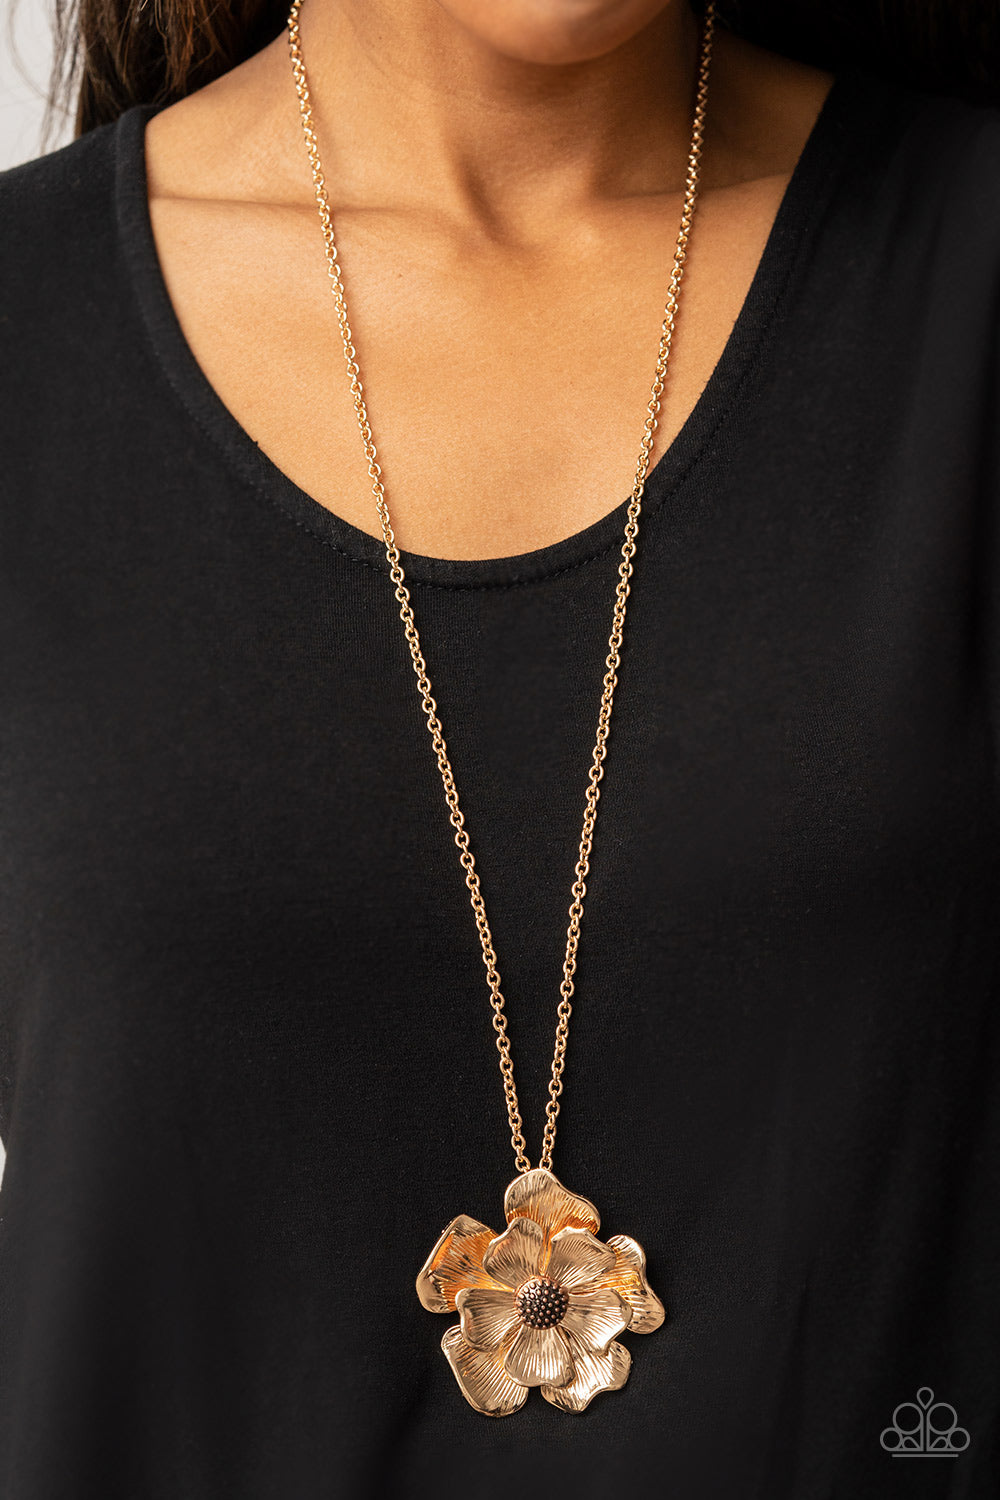 Paparazzi Necklace - Homegrown Glamour - Gold